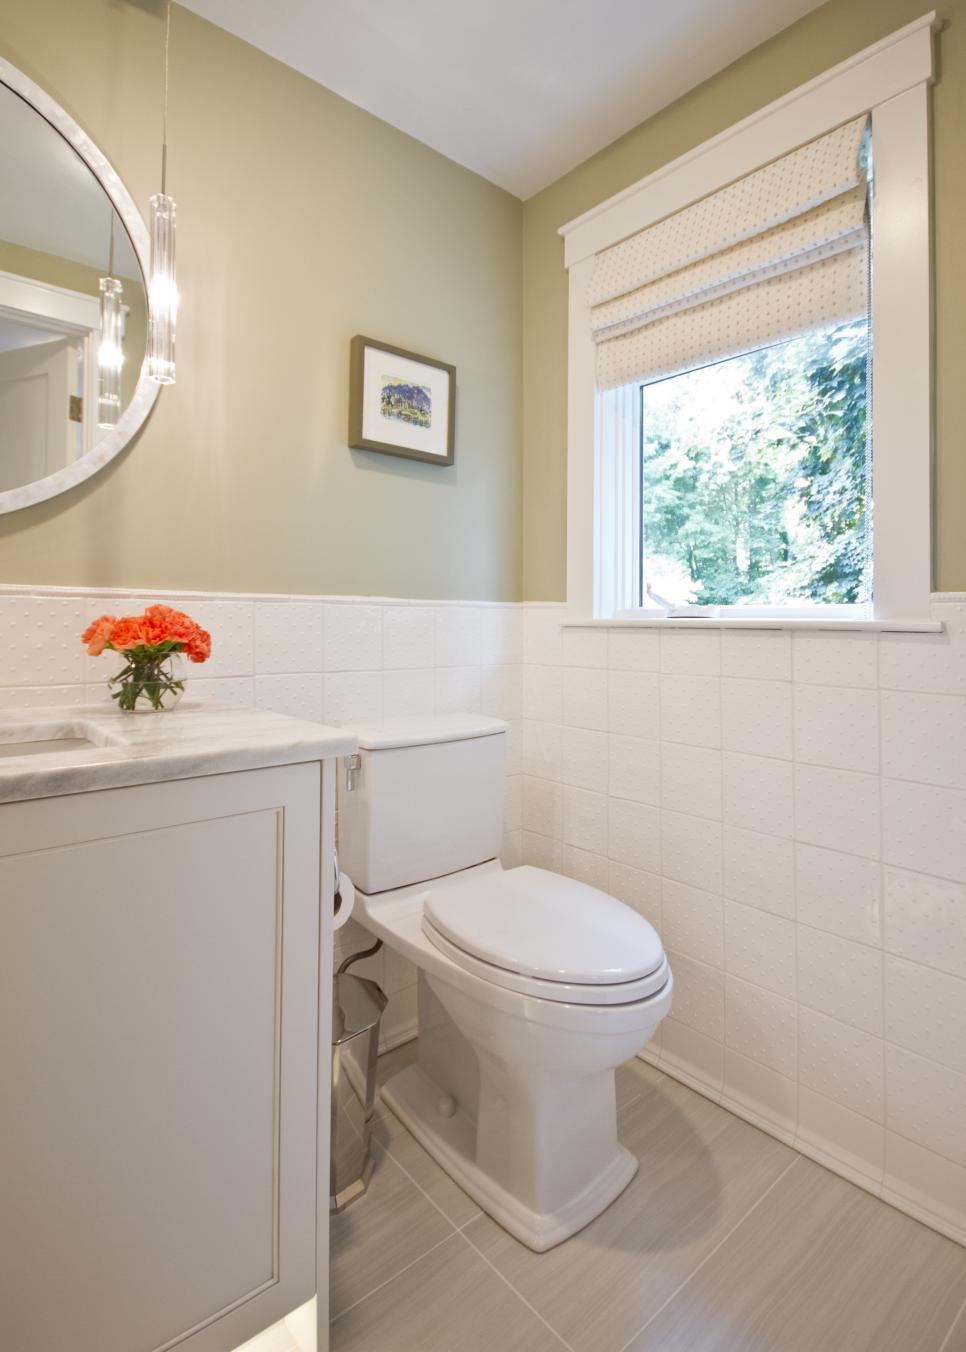 Guest Bathroom With Taupe Walls and White Tile Backsplash | HGTV